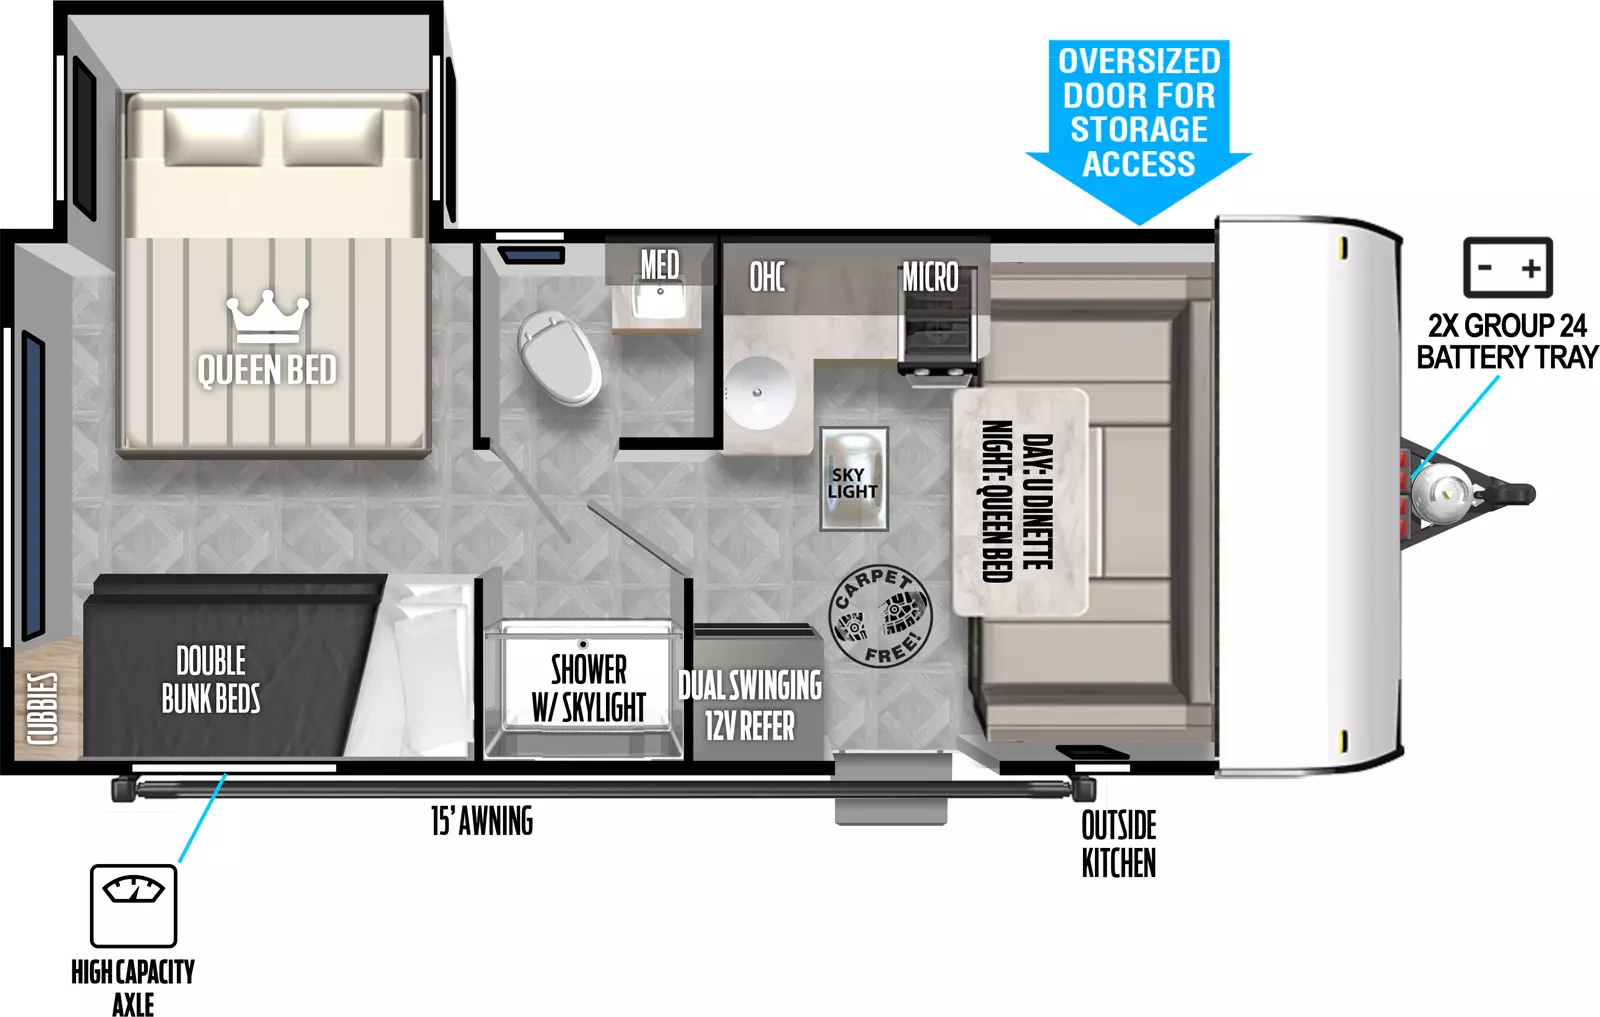 The 176QBHK has one slideout and one entry. Exterior features storage, 2x group 24 battery tray, outside kitchen, high capacity axle, and 15 foot awning. Interior layout front to back: carpet-free RV; u-dinette converts to queen bed; off-door side cooktop, microwave, and overhead cabinet with kitchen counter that wraps to inner wall with sink; door side entry, dual swinging 12V refrigerator, and skylight; pass through full bathroom with toilet, sink and medicine cabinet on off-door side, and shower with skylight on door side; rear bedroom with off-door side queen bed slideout, and door side double bunk beds with cubbies.